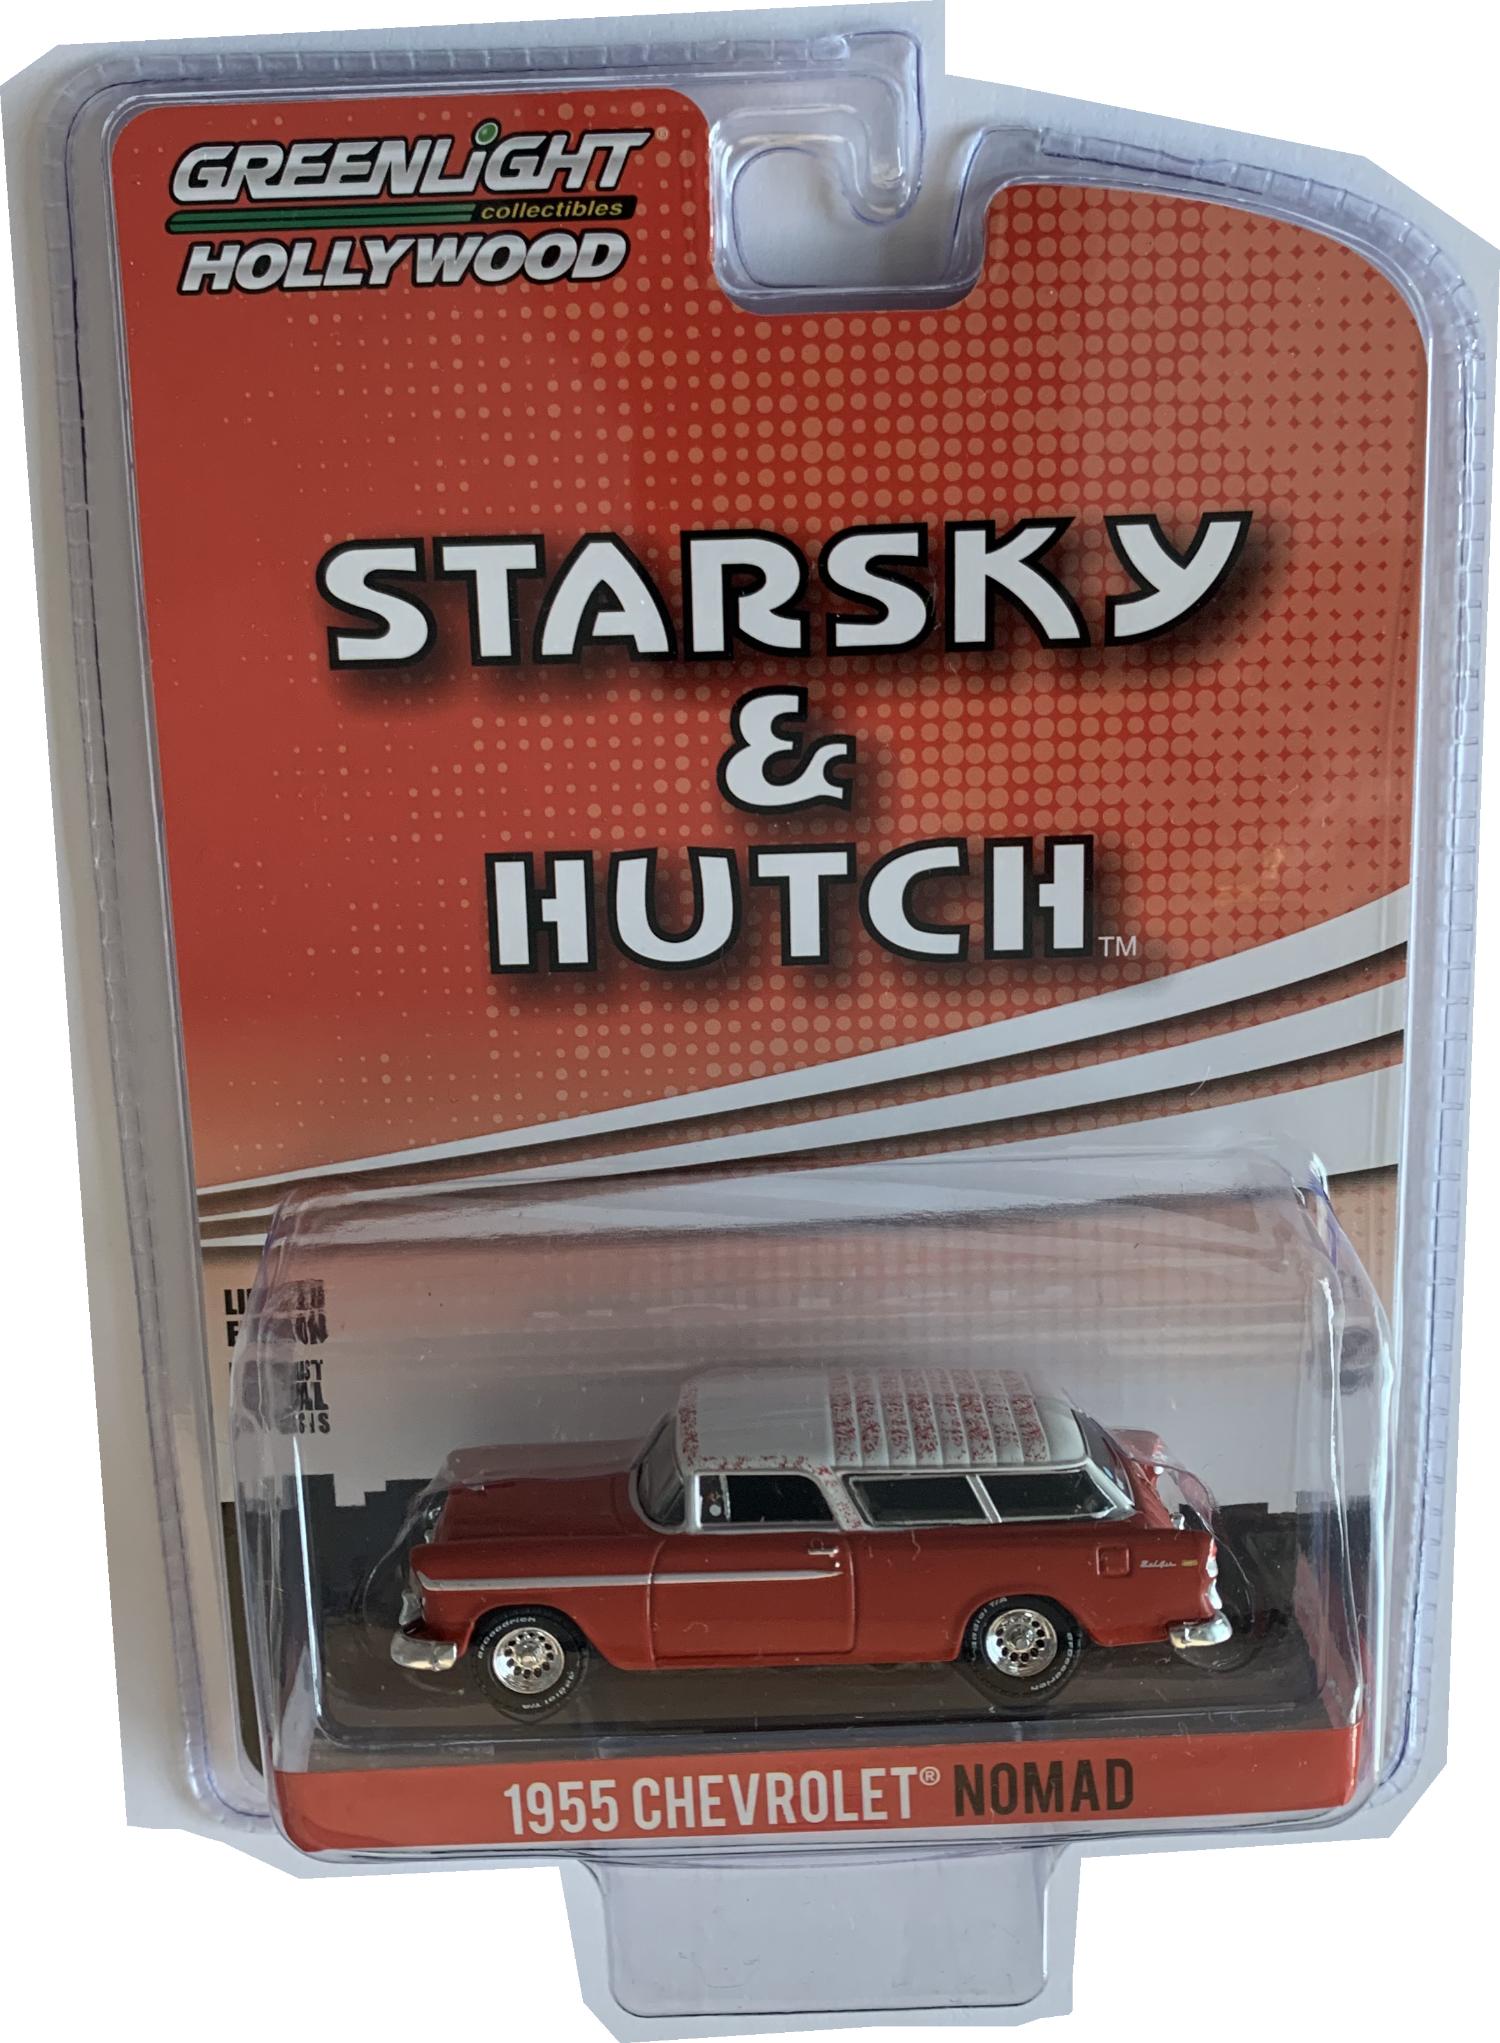 Starsky & Hutch 1955 Chevrolet Nomad 1:64 scale model from Greenlight, 44855-A